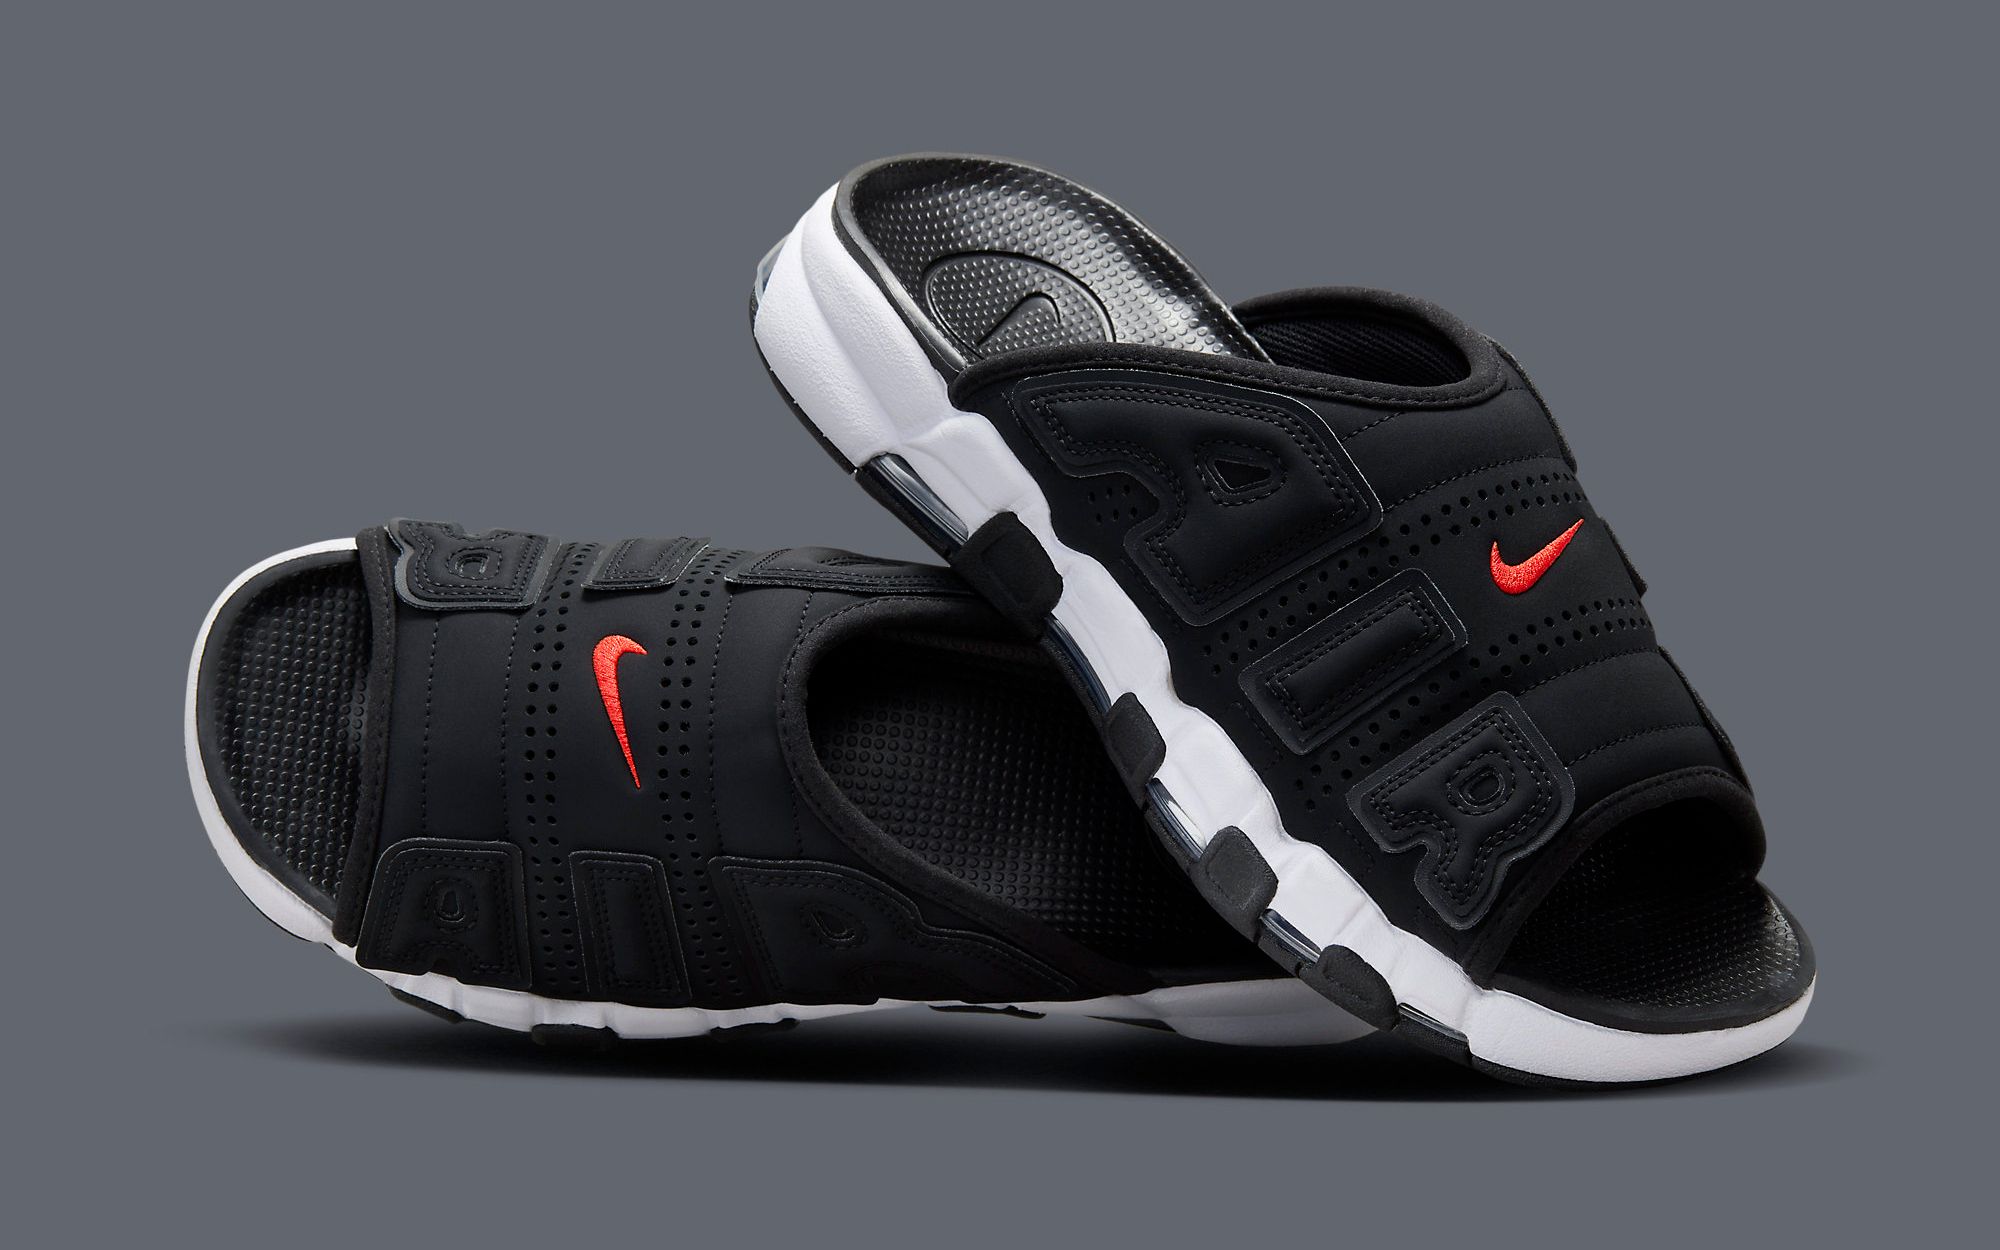 First Looks // Nike Air More Uptempo Slide “Black Infrared